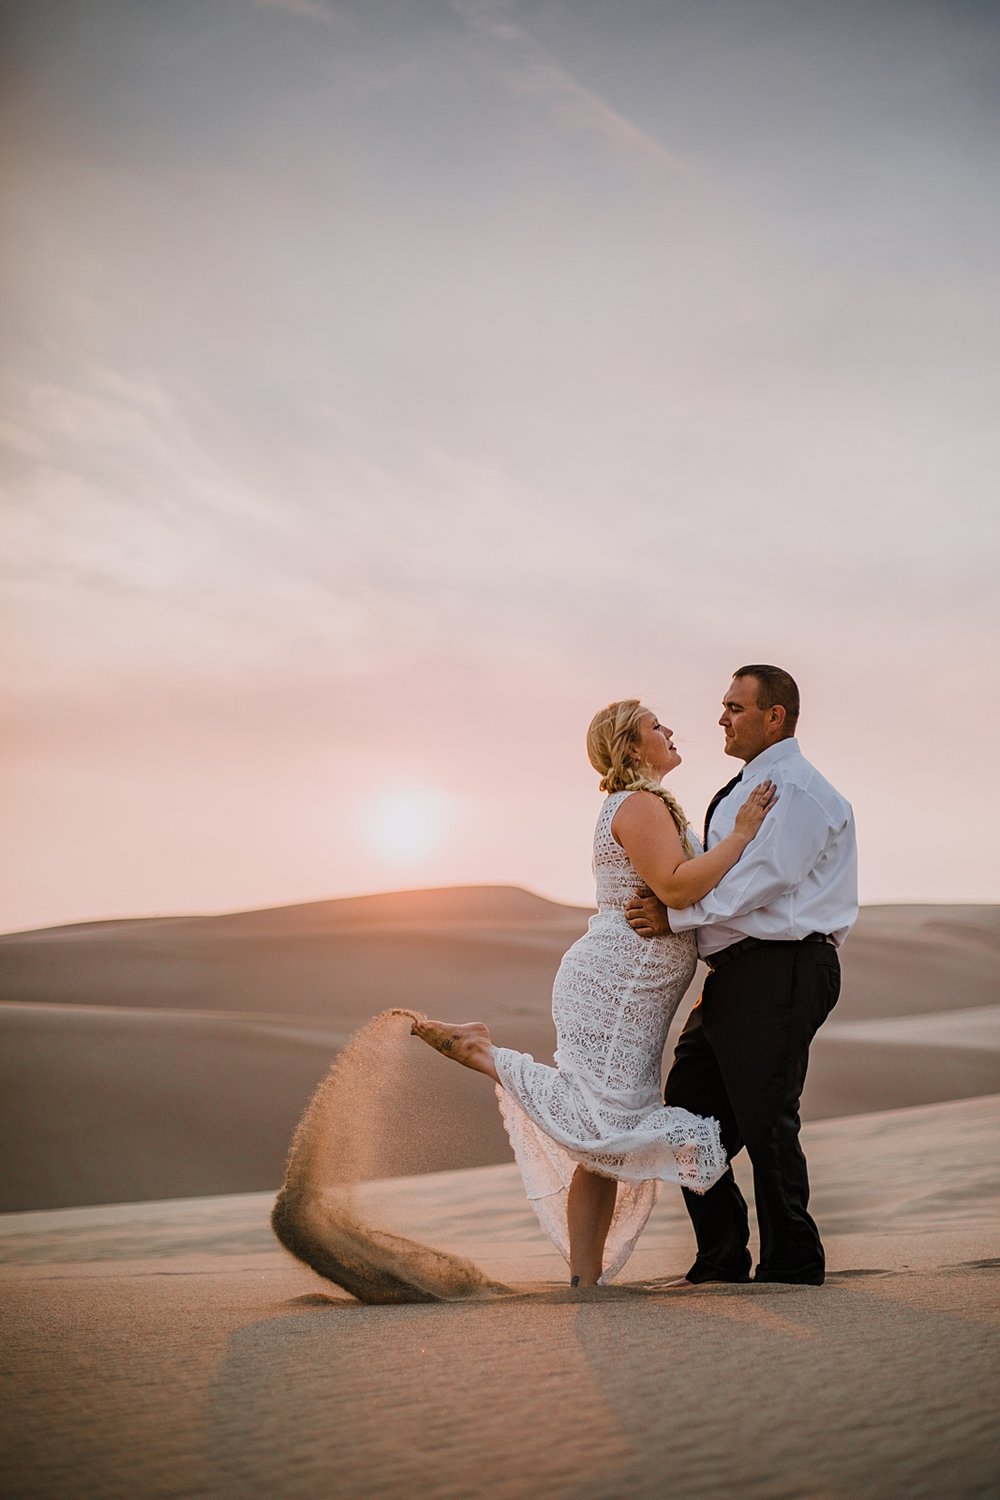 couple hiking the great sand dunes near crestone colorado, great sand dunes national park hiking, great sand dunes national park sunset elopement, elope at the great sand dunes